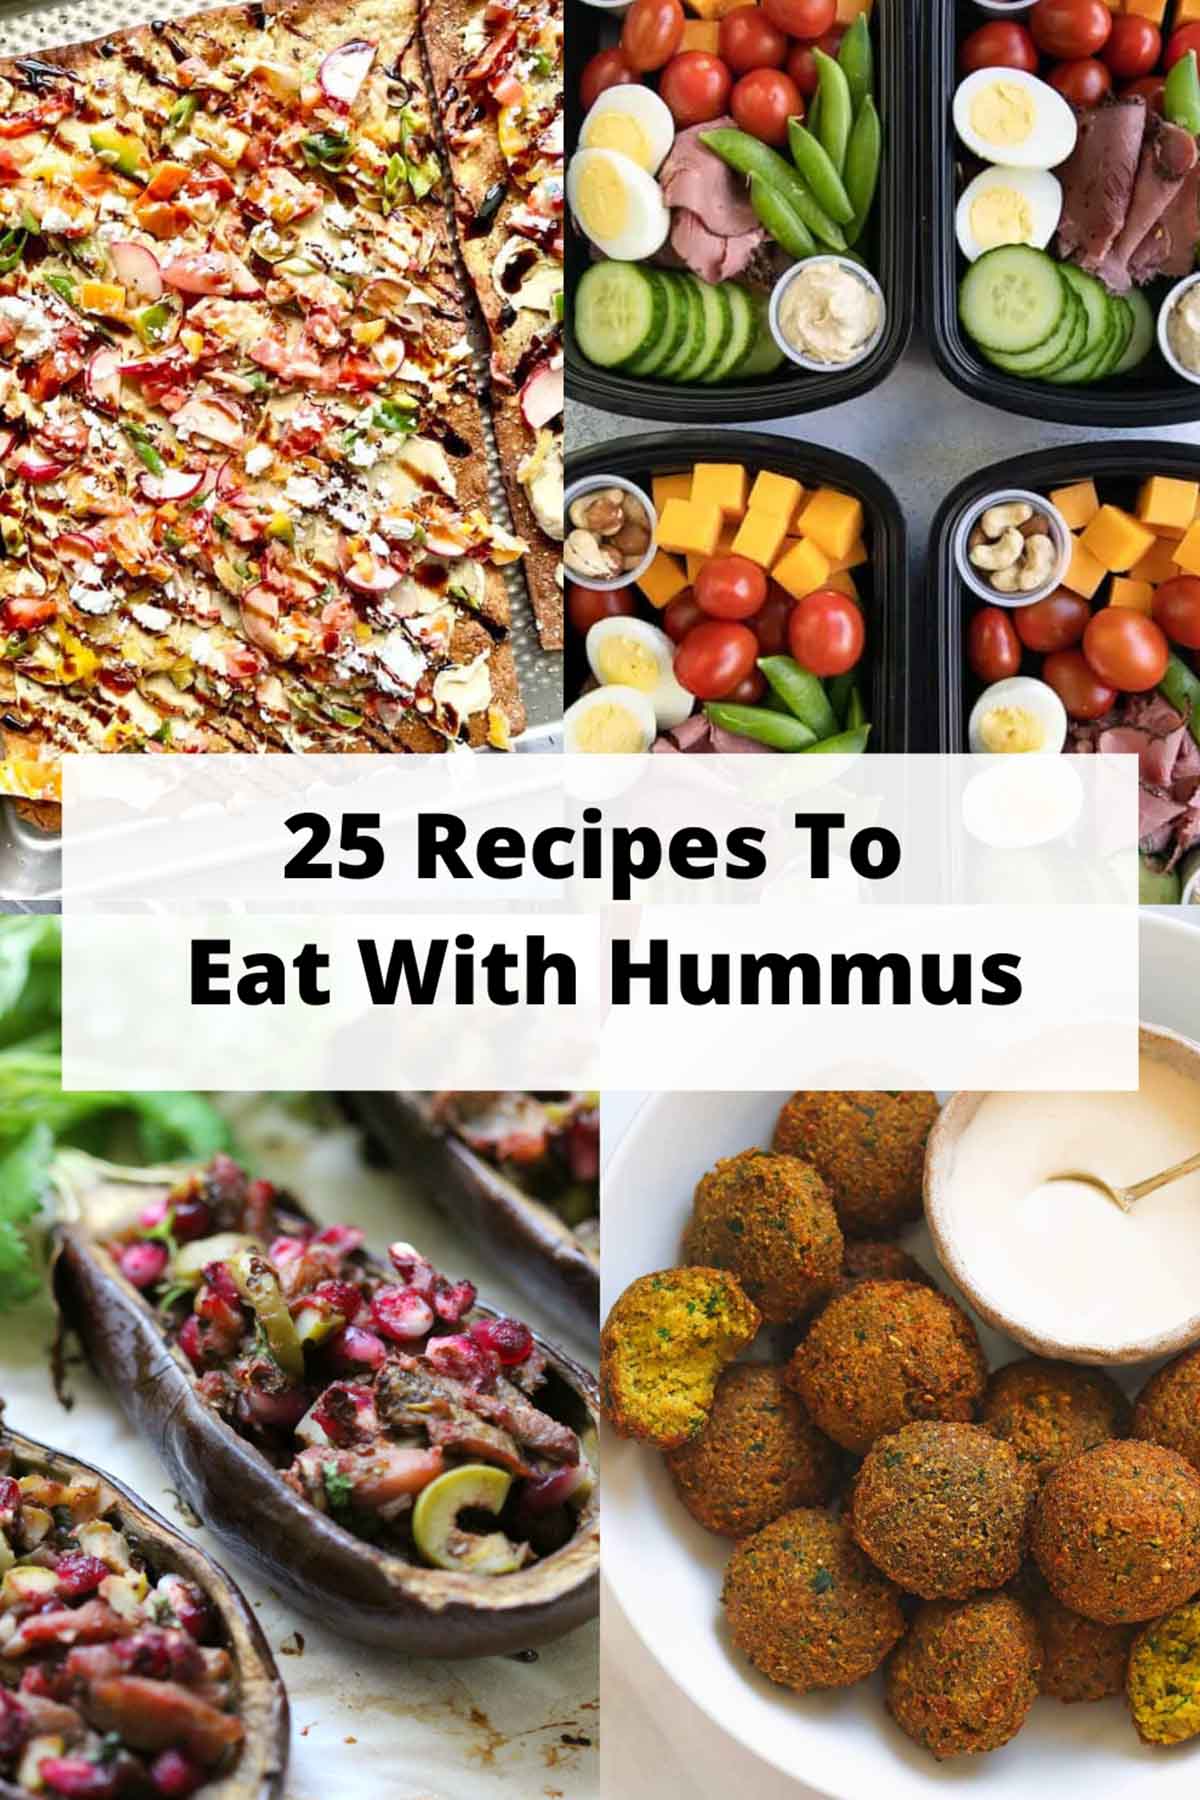 25 recipes to eat with hummus Pinterest pin.